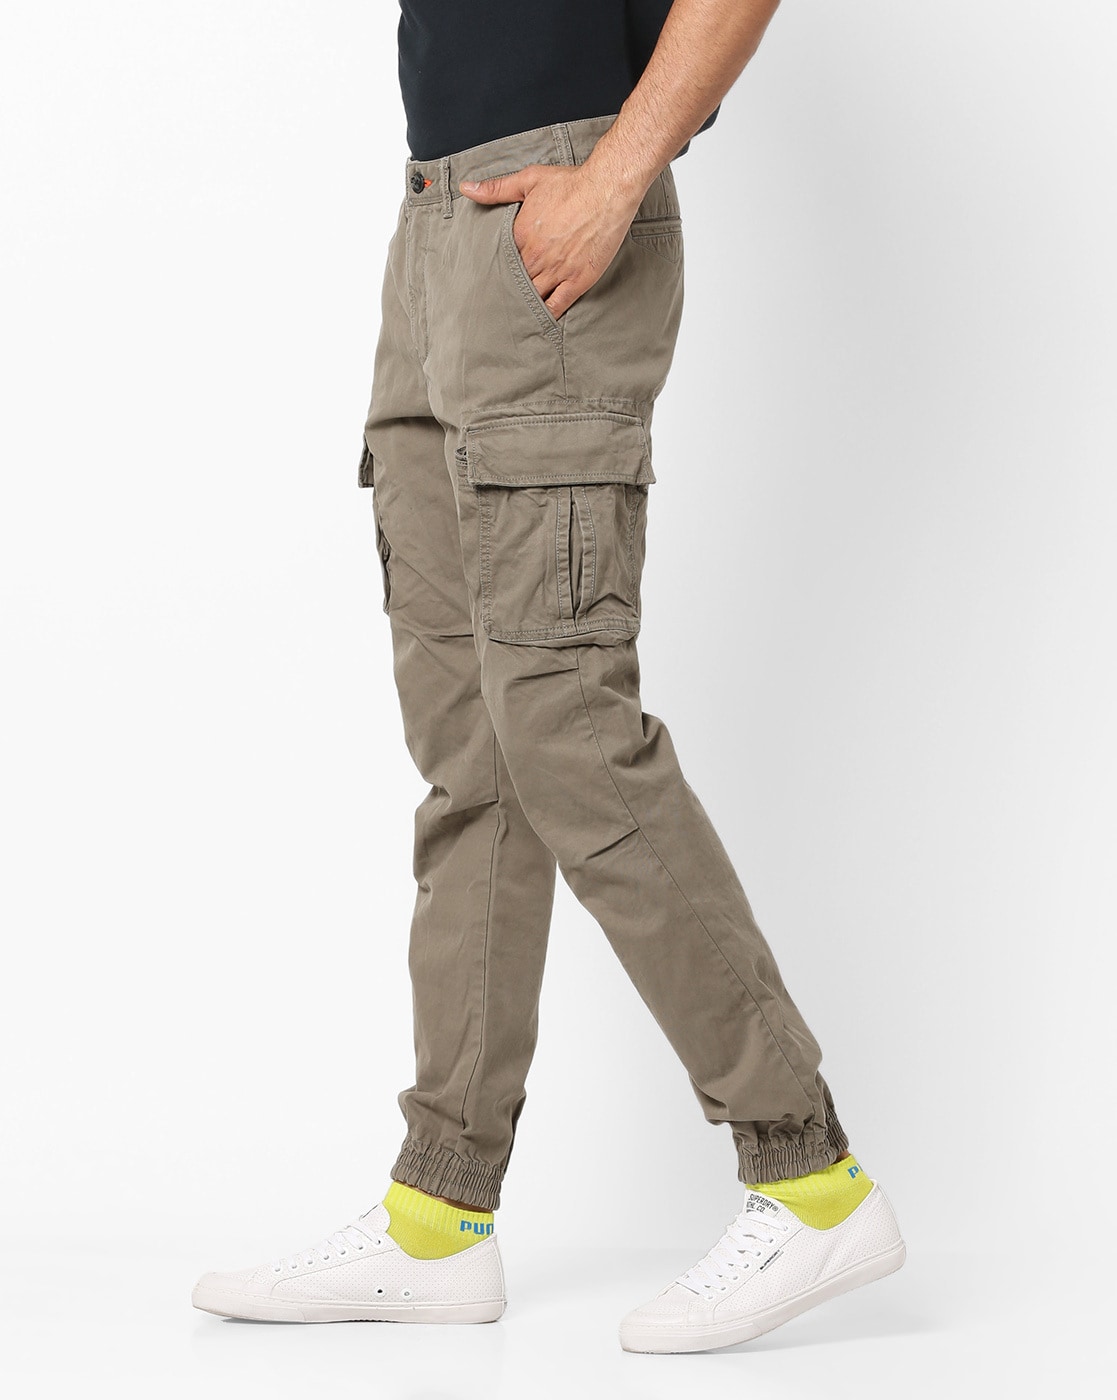 Grey Solid Superdry Trousers Mens Slim Fit